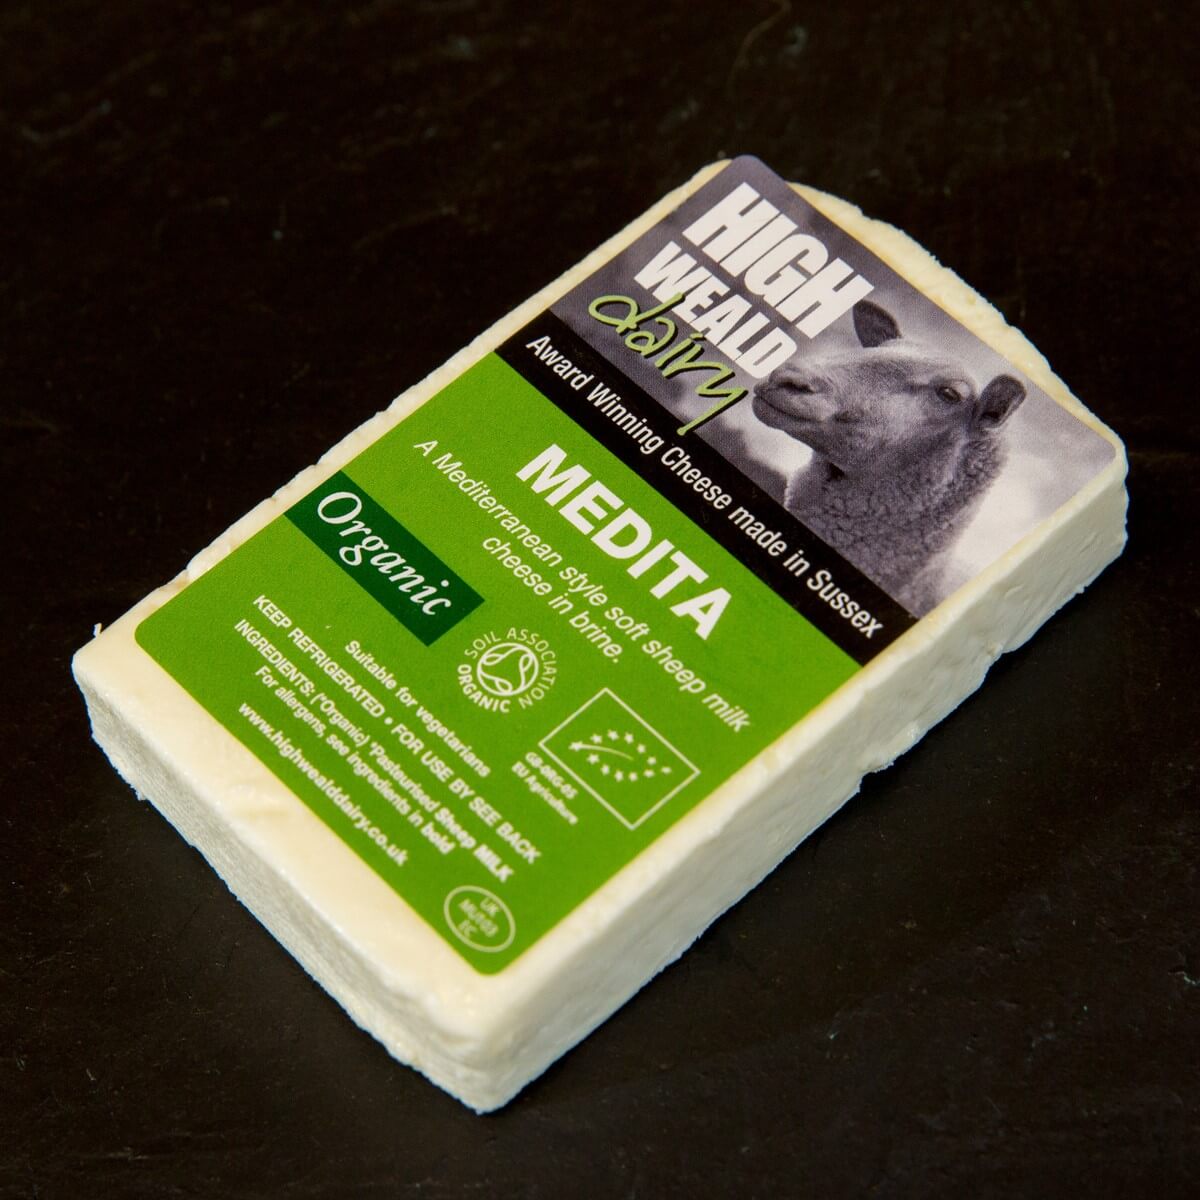 Image of High Weald Organic Medita made in the UK by High Weald Dairy. Buying this product supports a UK business, jobs and the local community